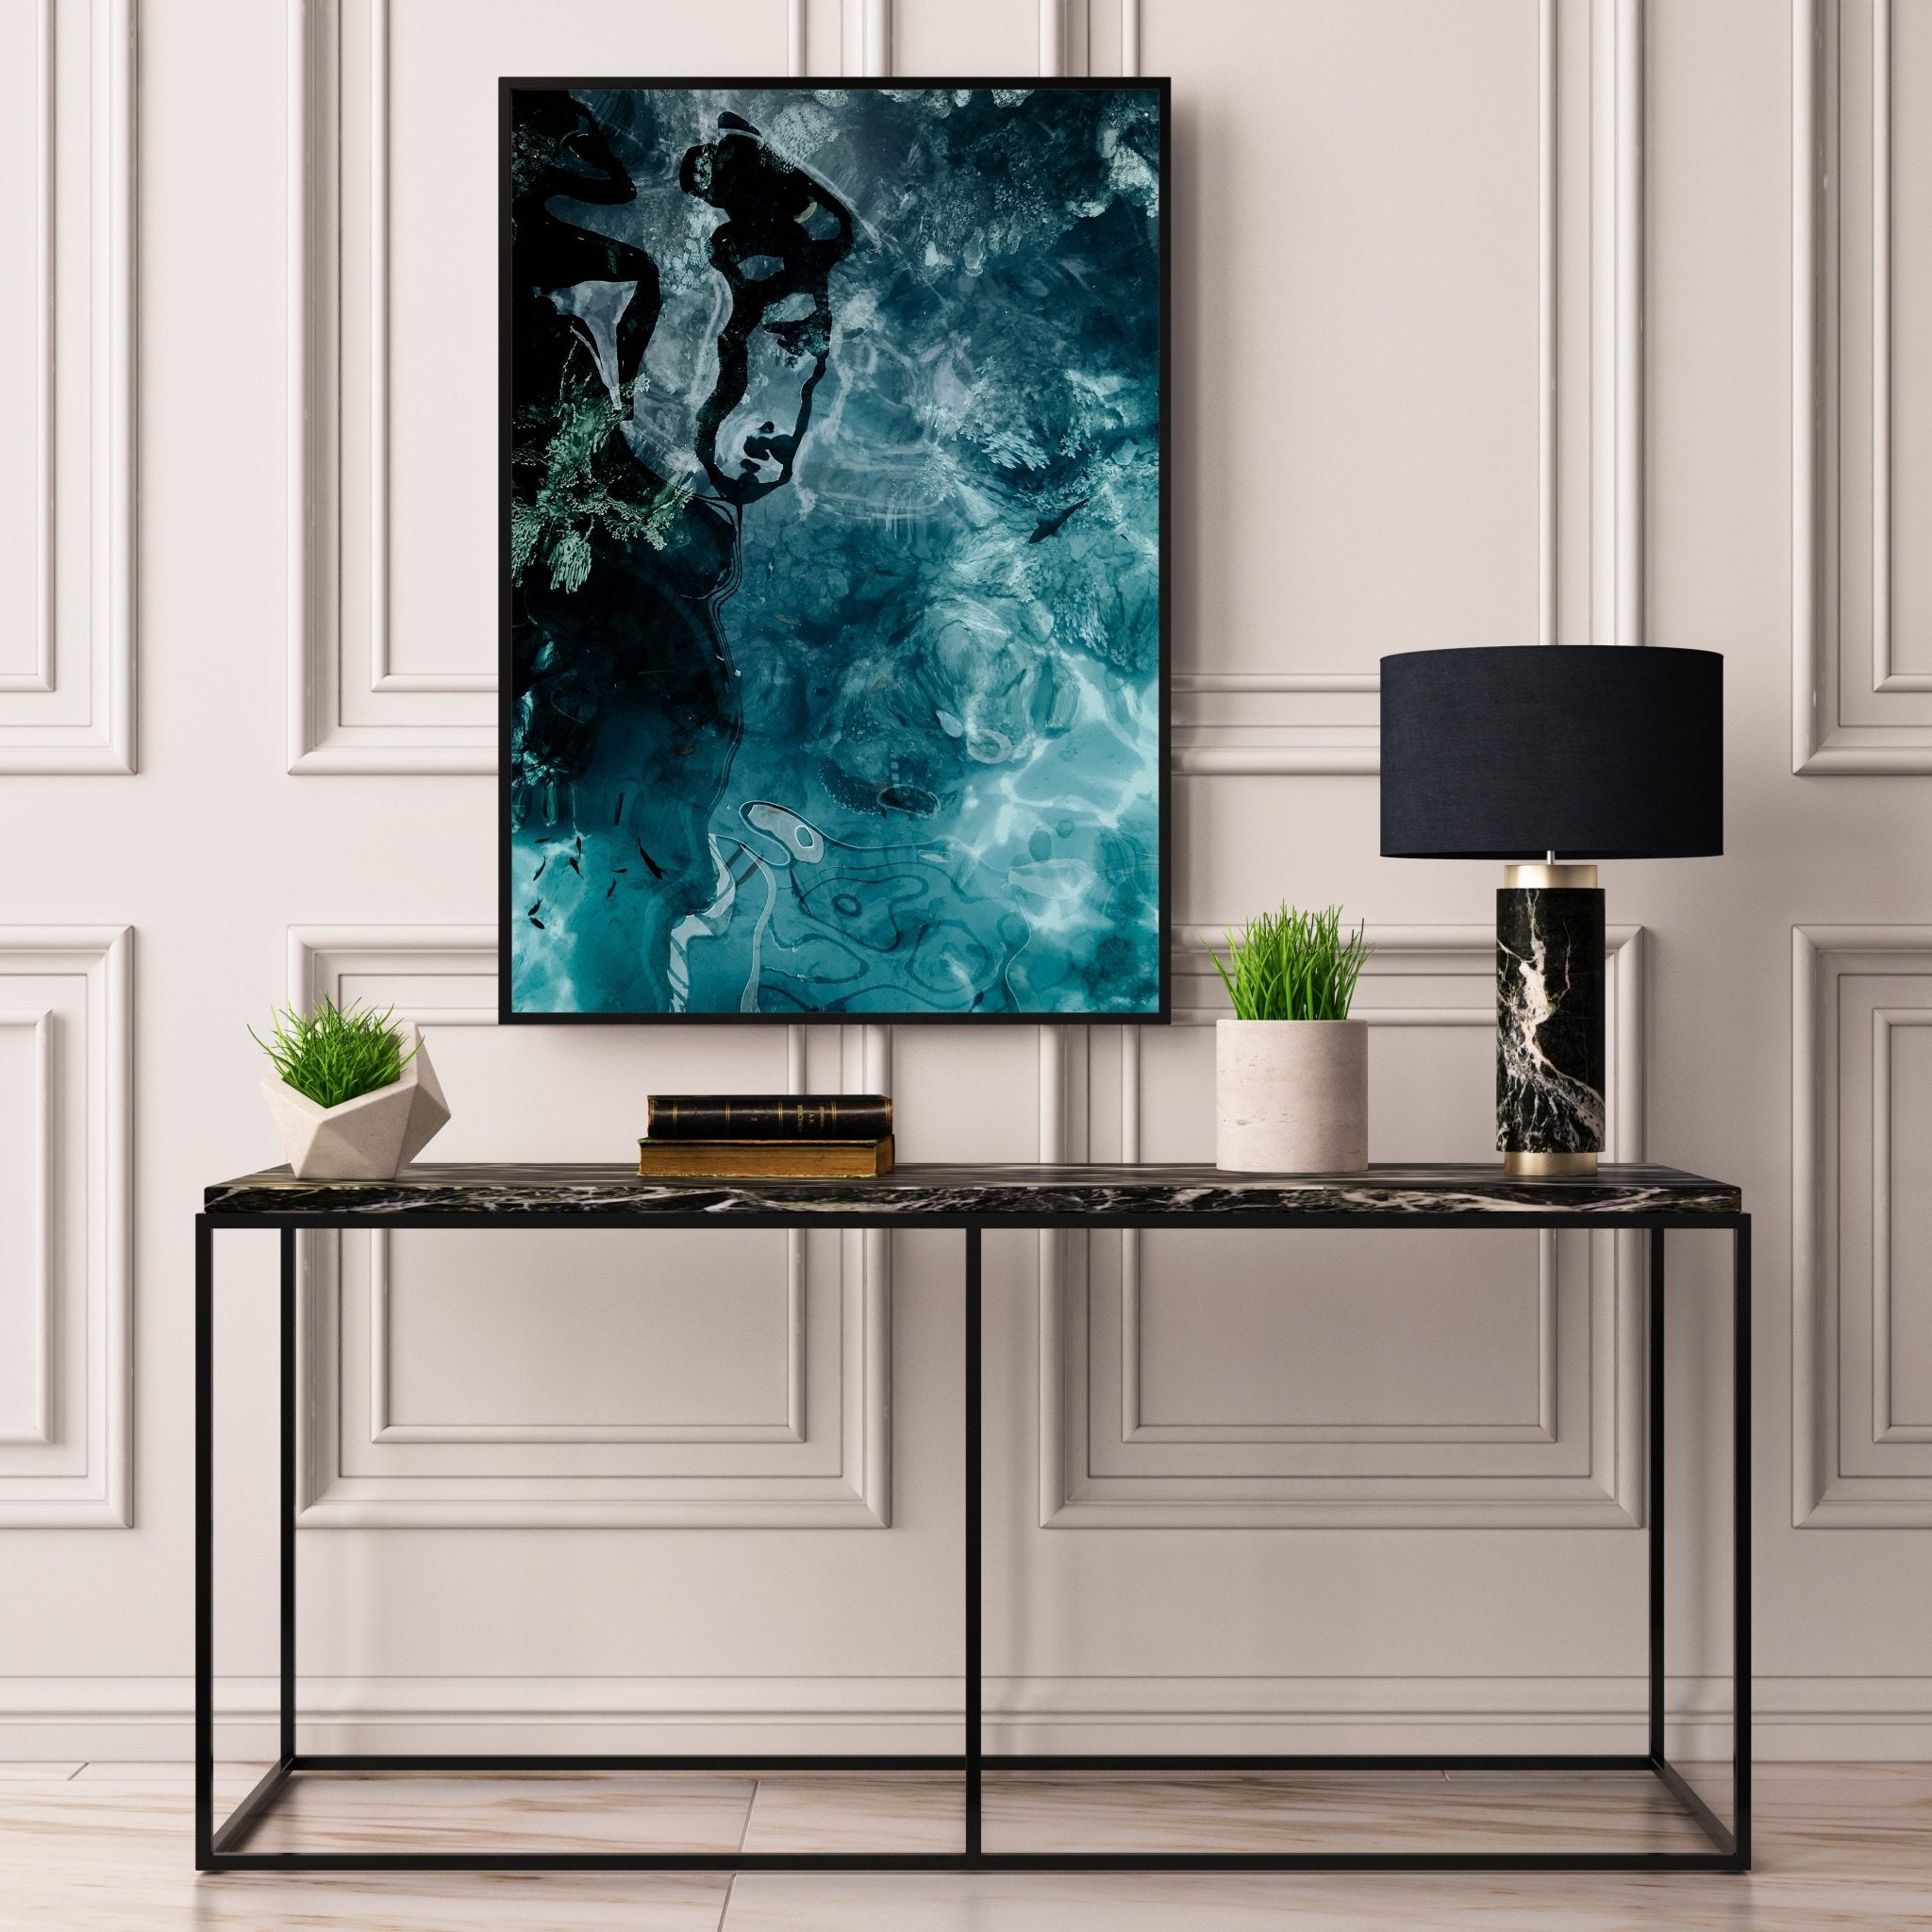 Sea Reflection - D'Luxe Prints